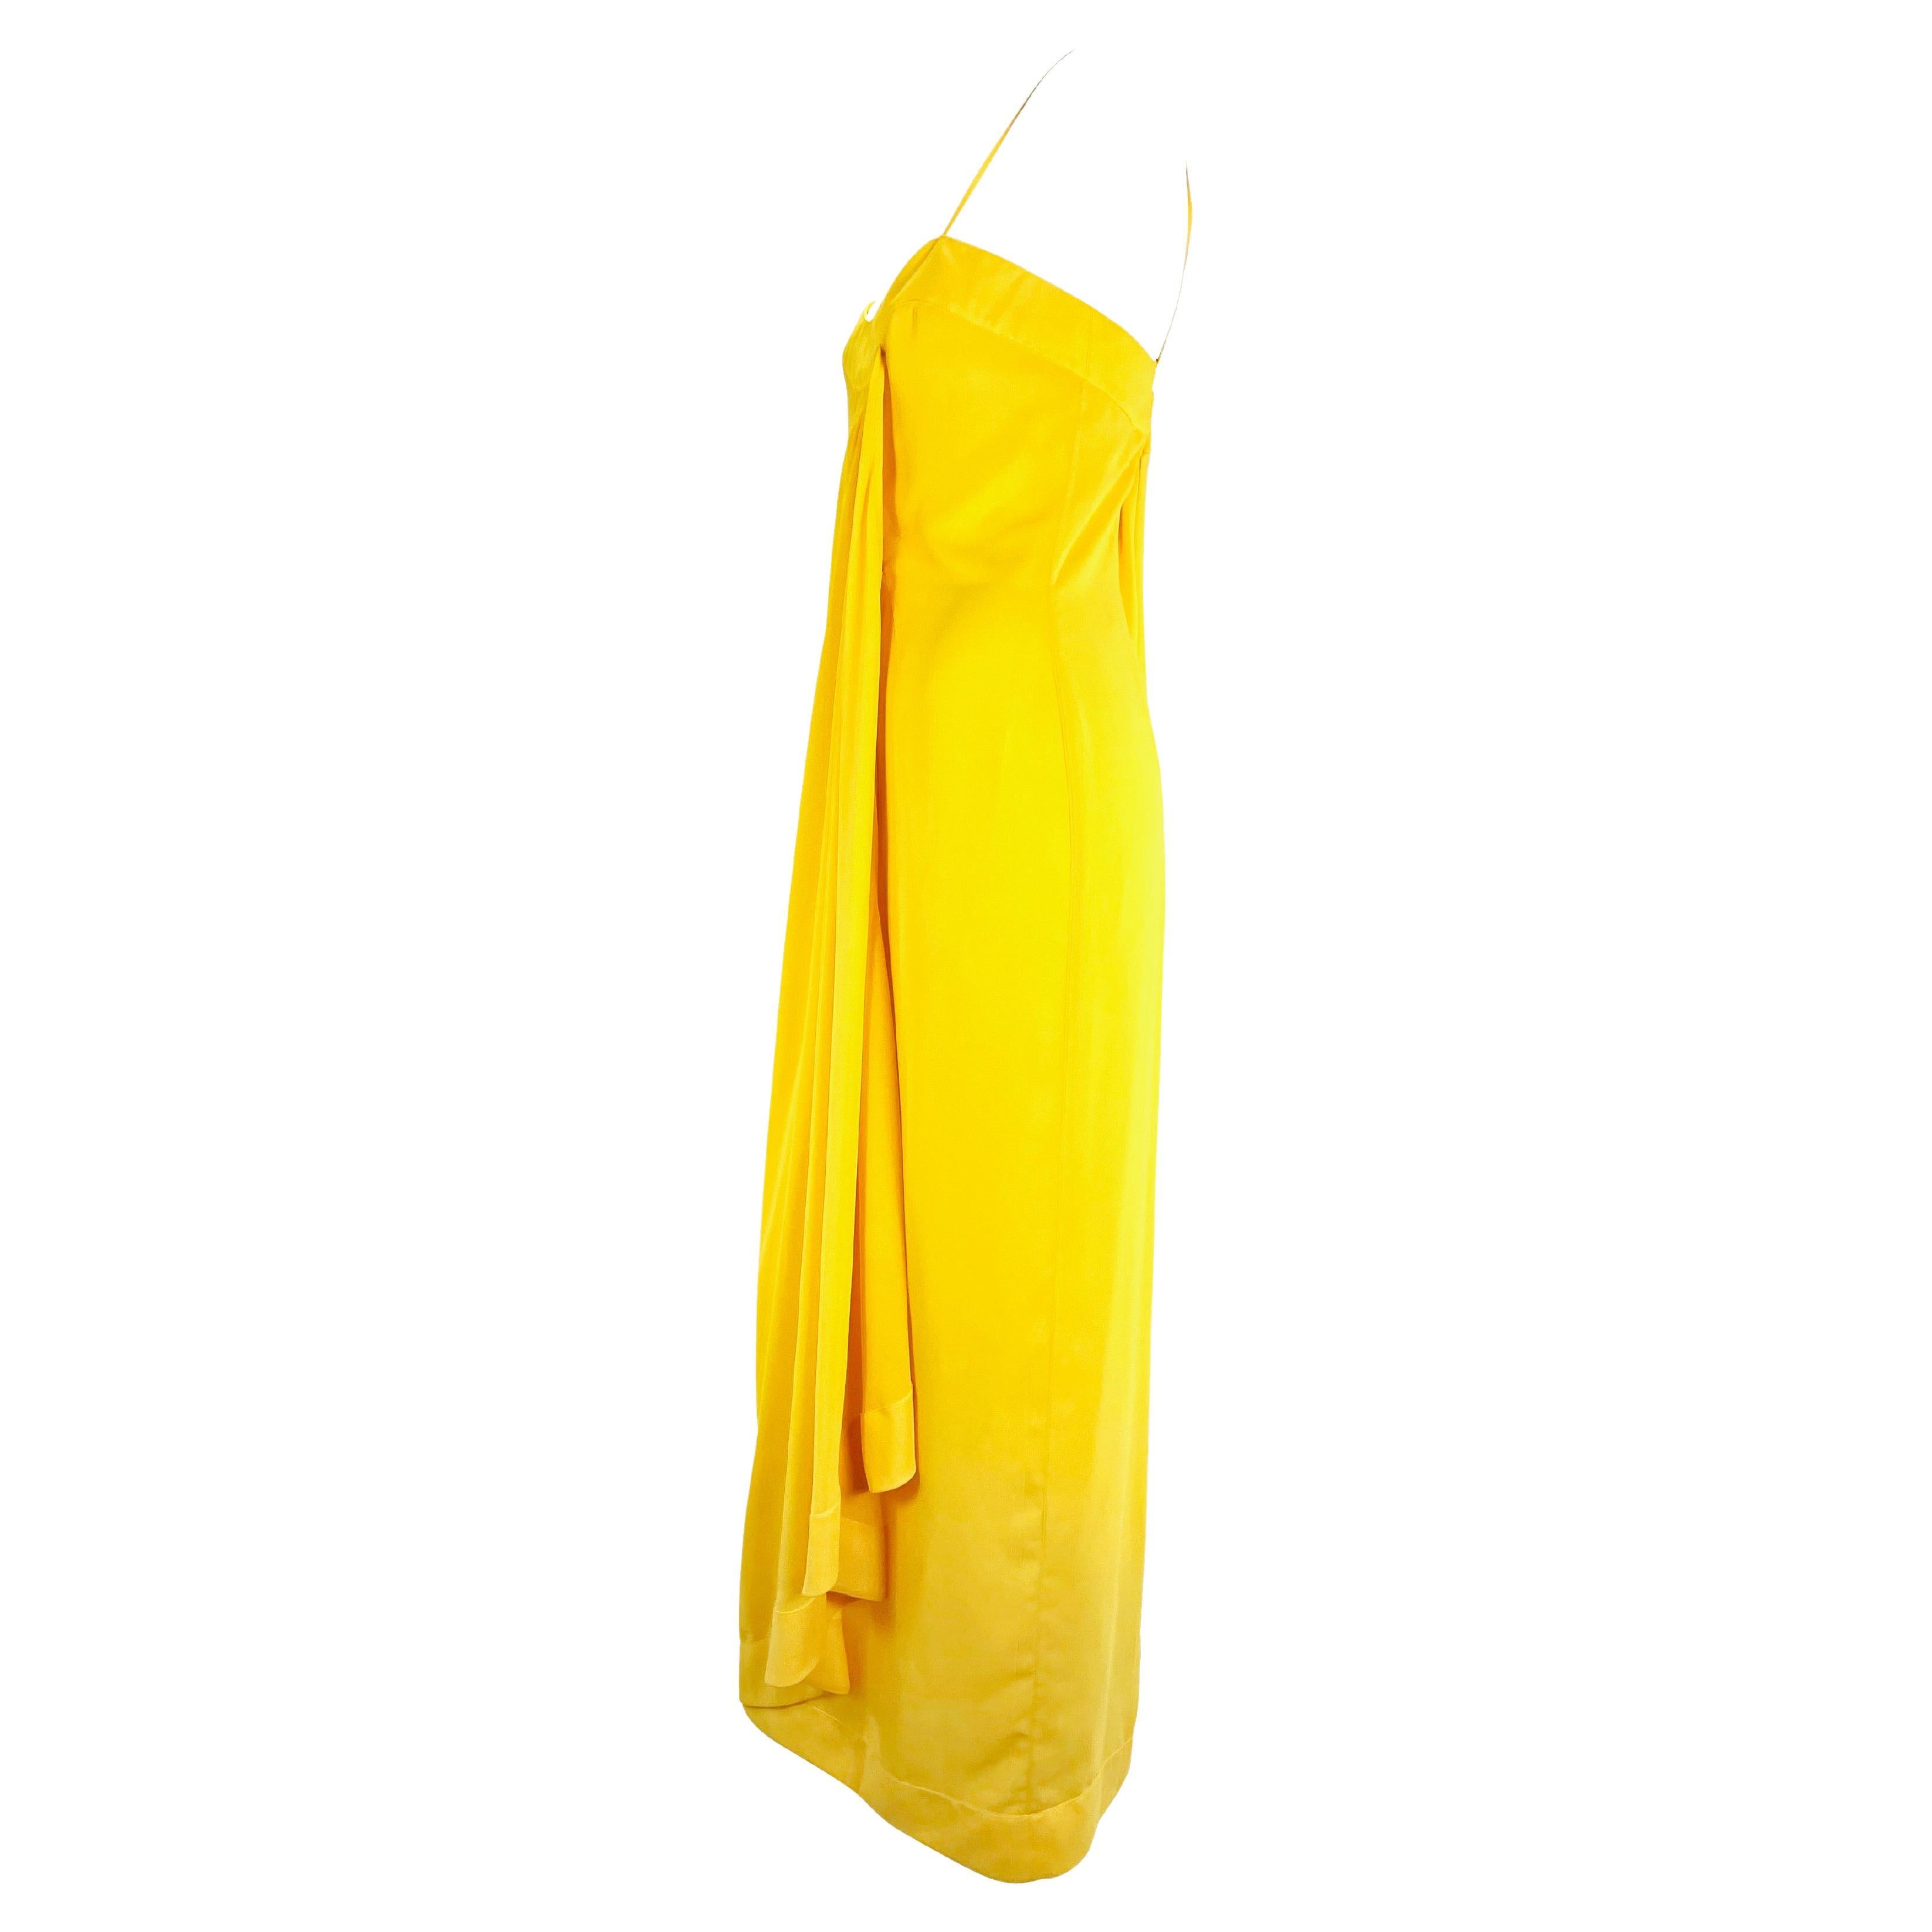 S/S 2000 Thierry Mugler Canary Yellow Chiffon Dress with Matching Shawl In Excellent Condition For Sale In West Hollywood, CA